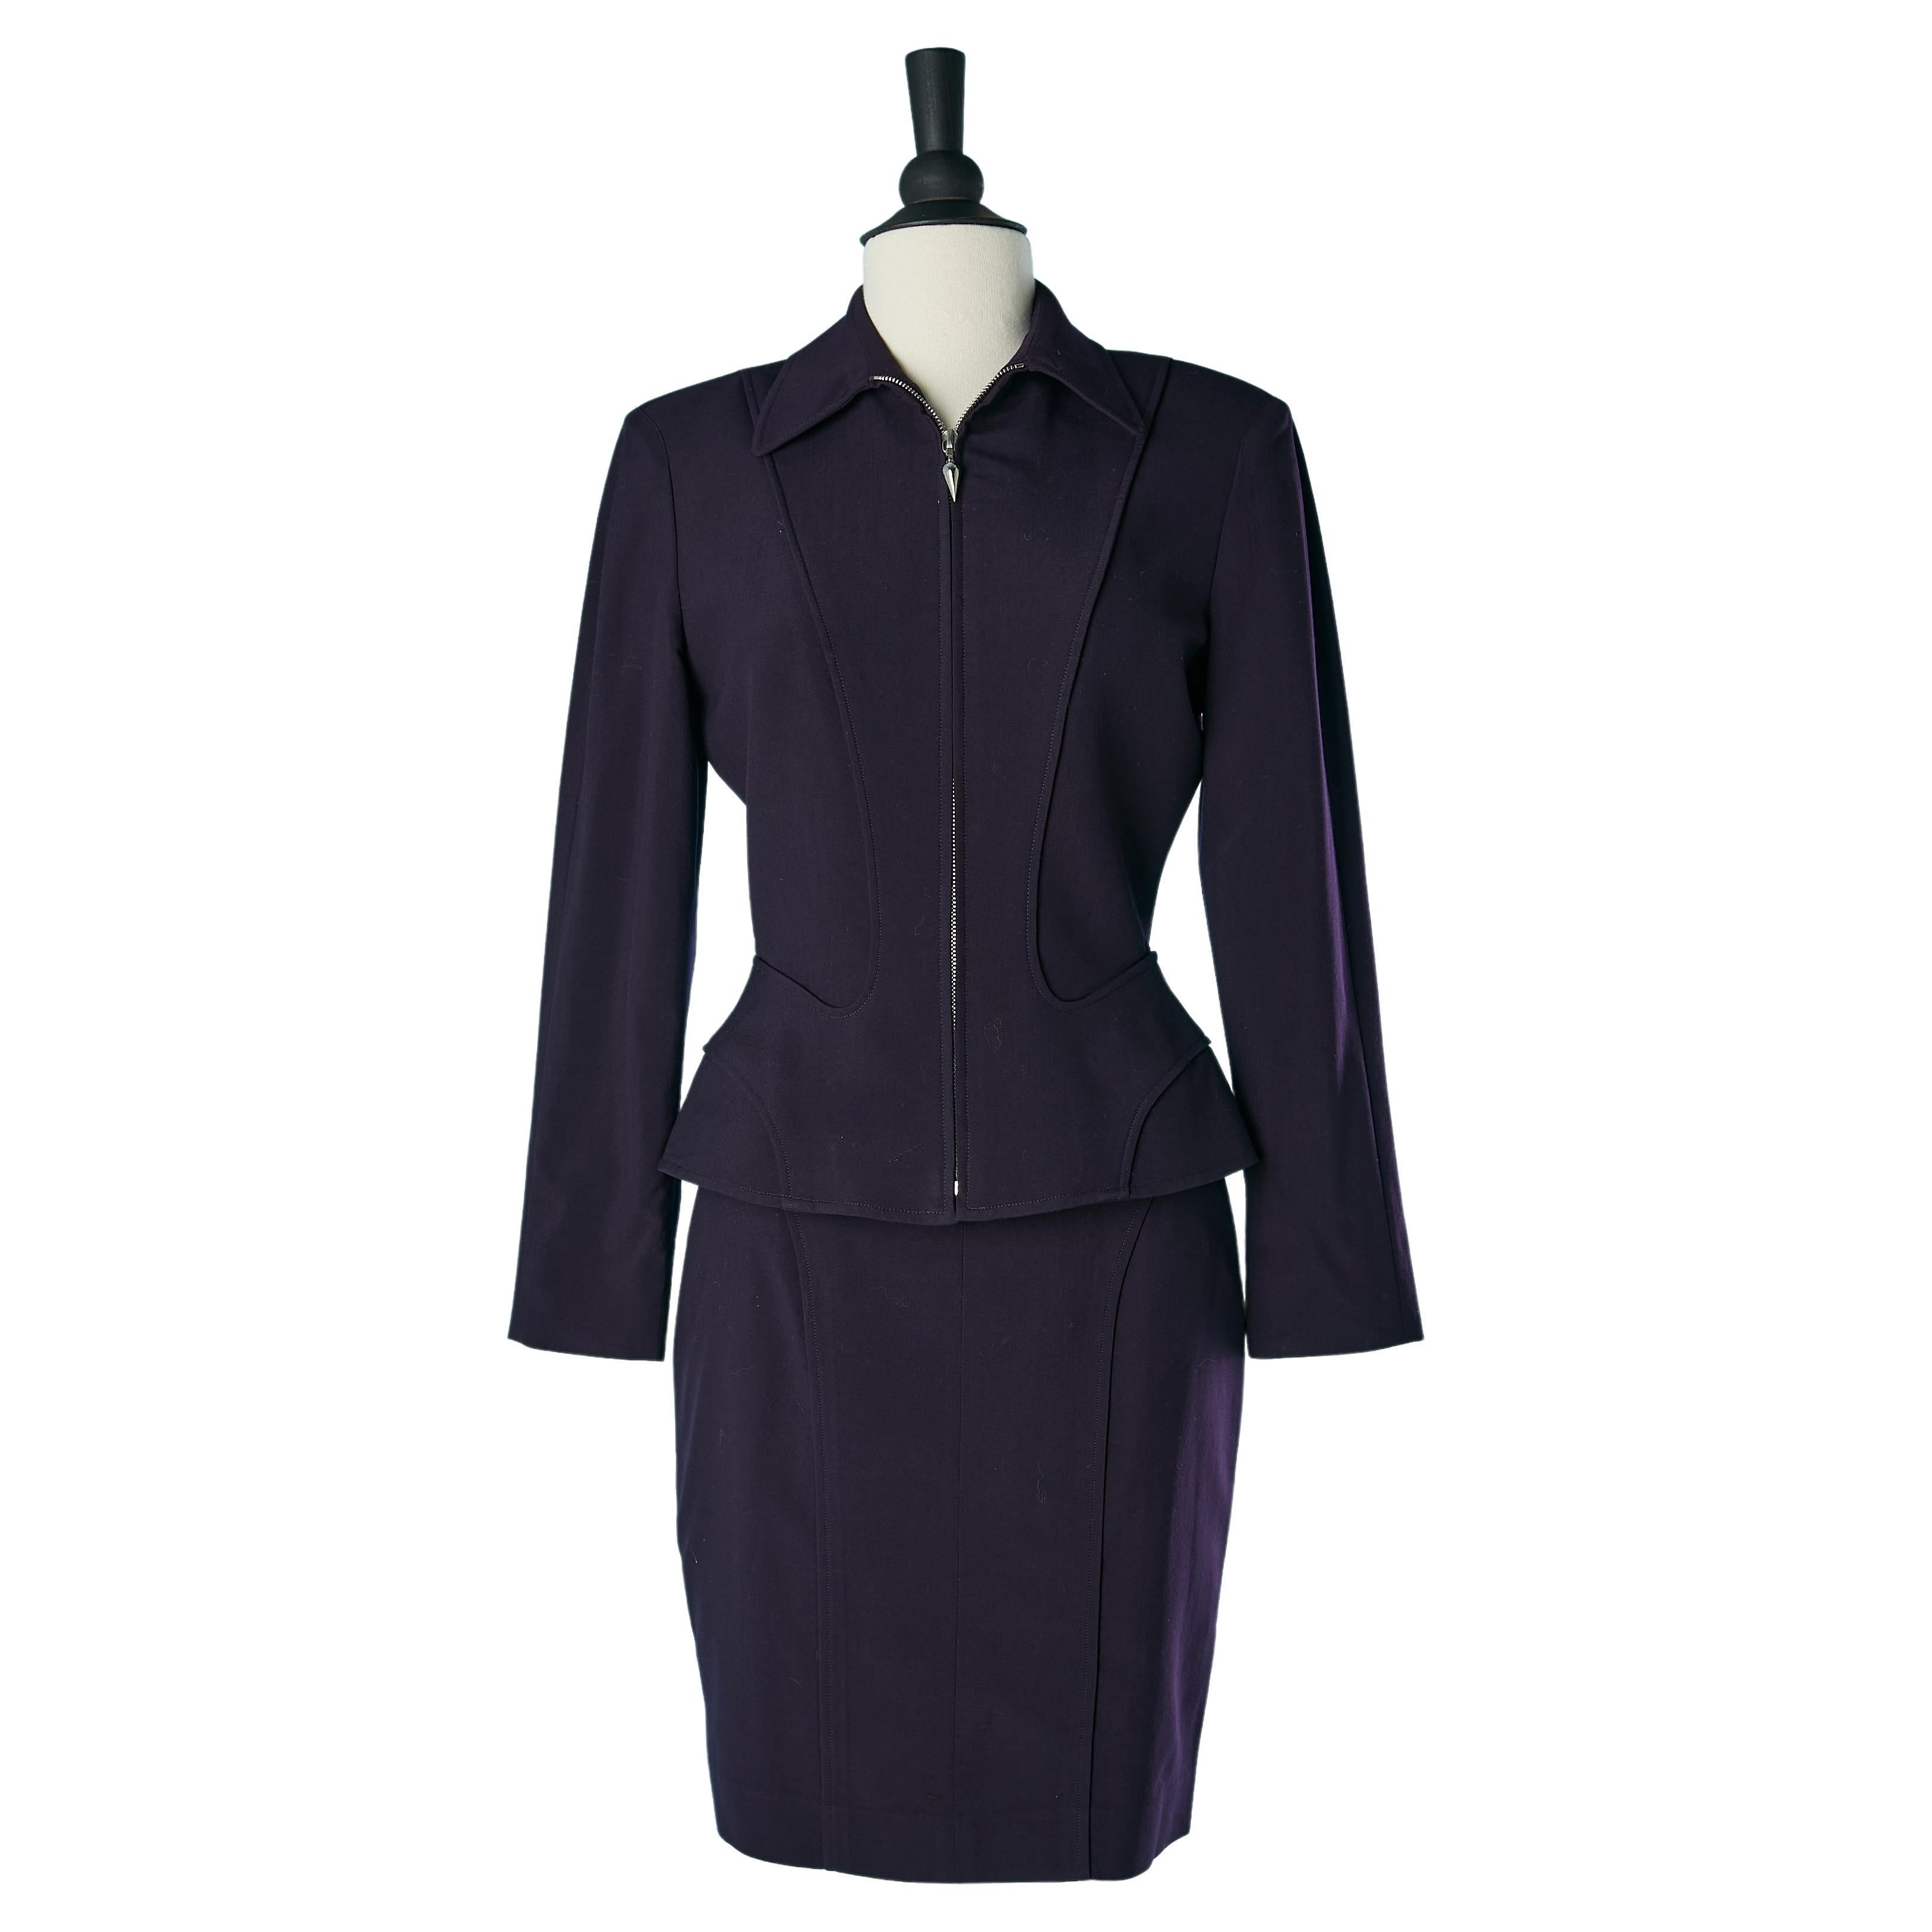 Purple skirt suit with zip closure middle front MUGLER  Circa 2000 For Sale